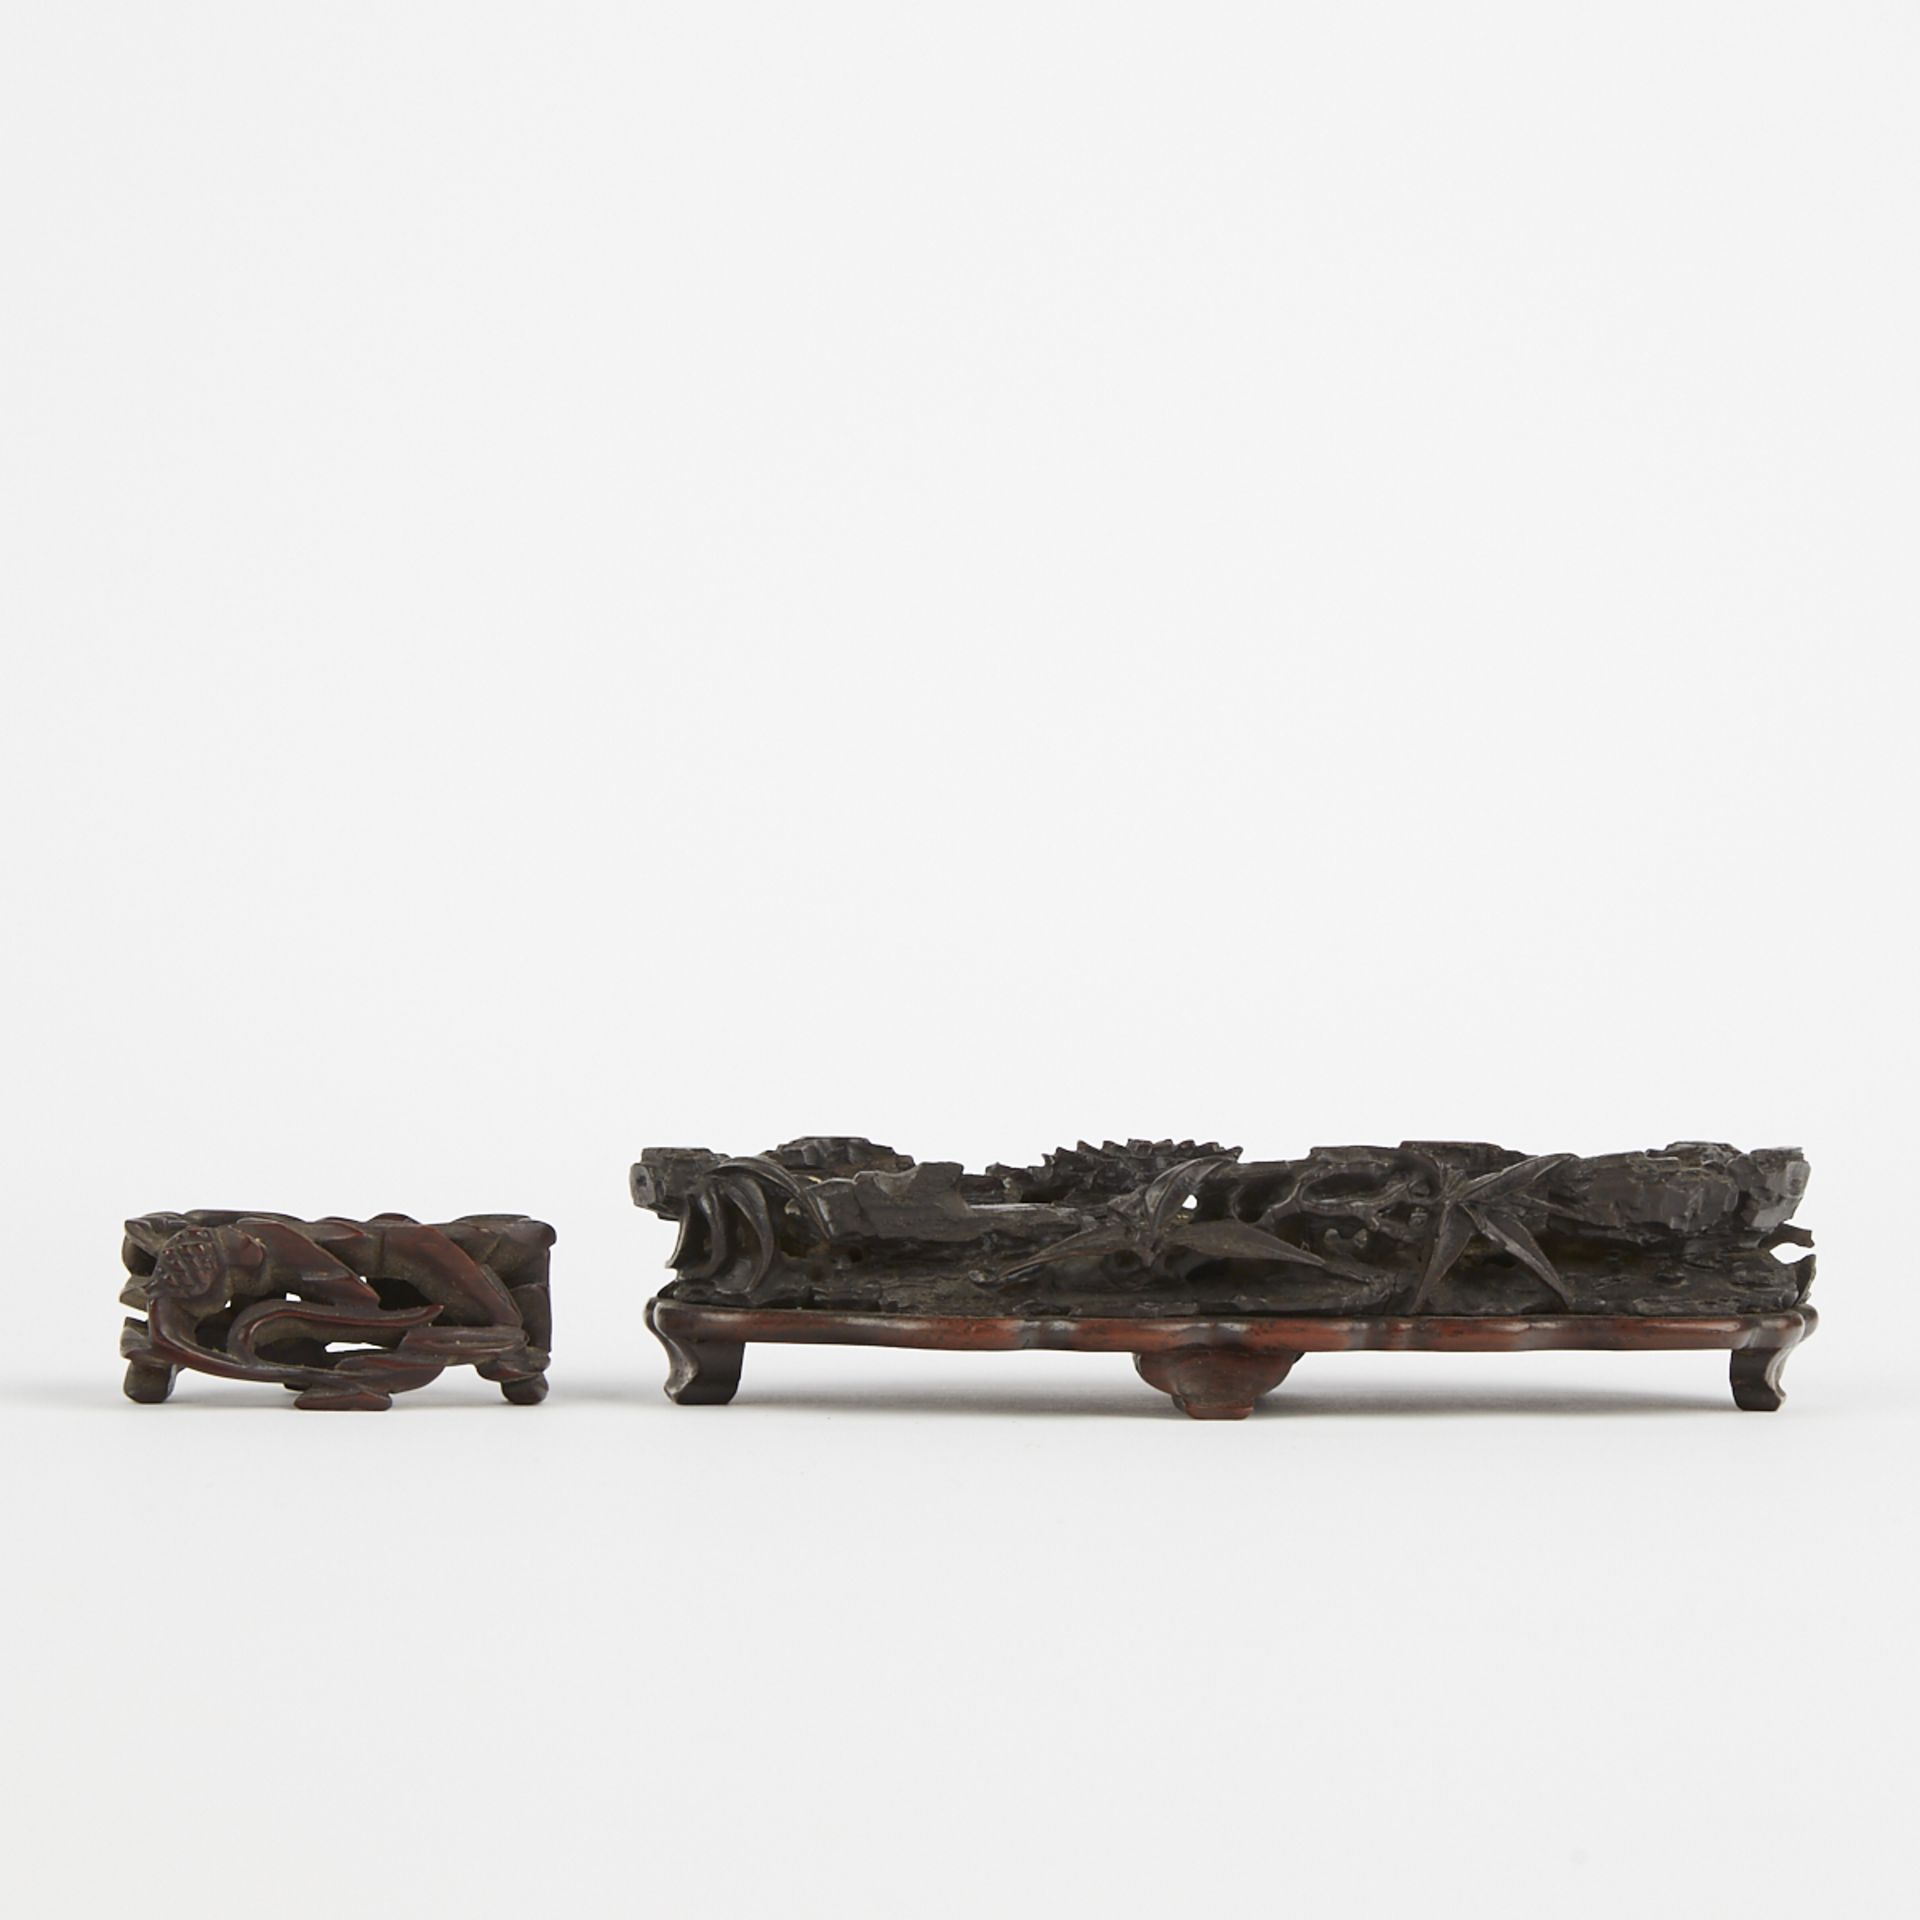 Pair of Chinese Carved Stands - One Zitan - Image 5 of 9